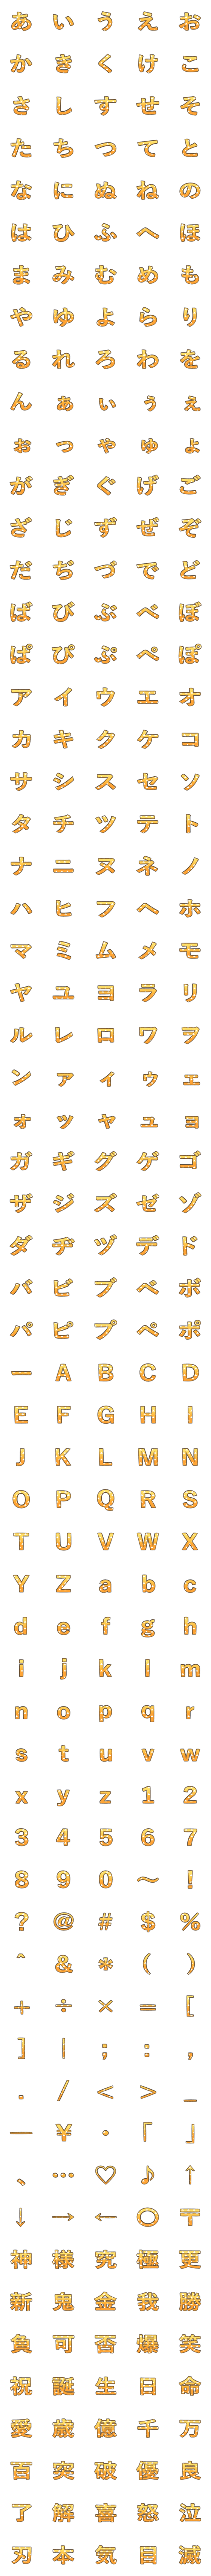 [LINE絵文字]鱗文様絵文字の画像一覧